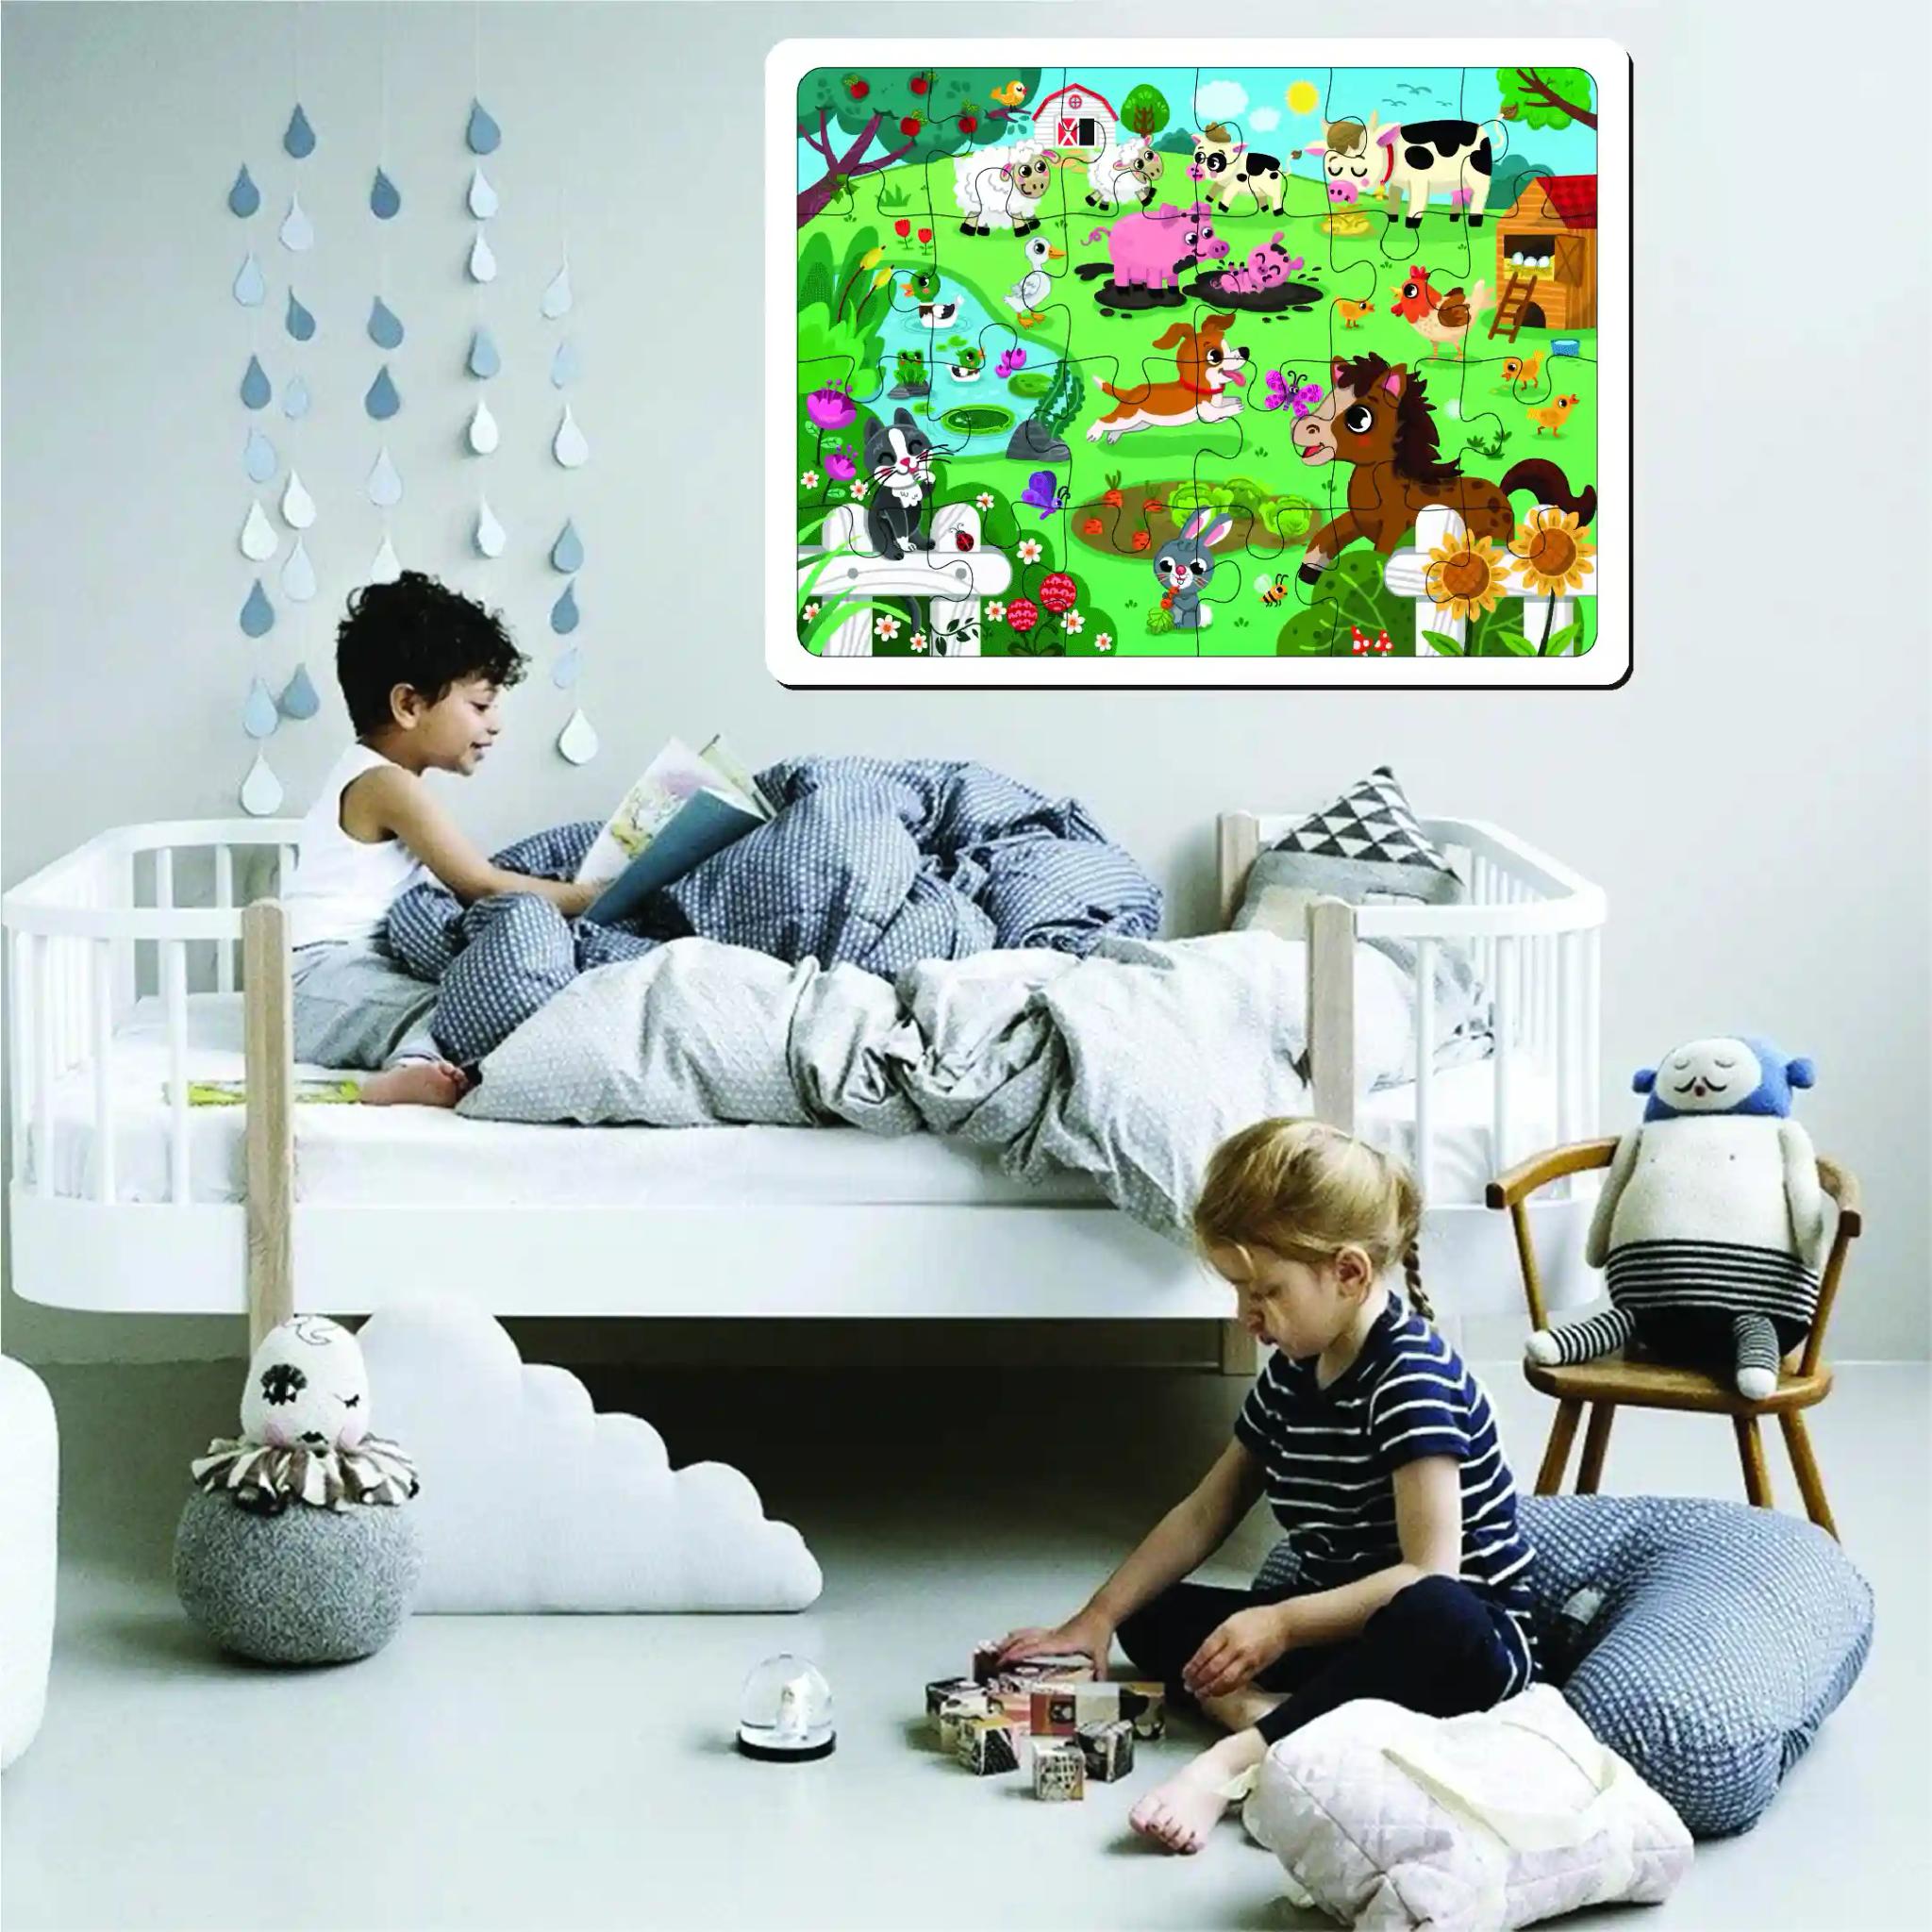 Mini Leaves Farm Animal Premium Wooden Floor Puzzle for Kids 24 Pieces with Wooden Box